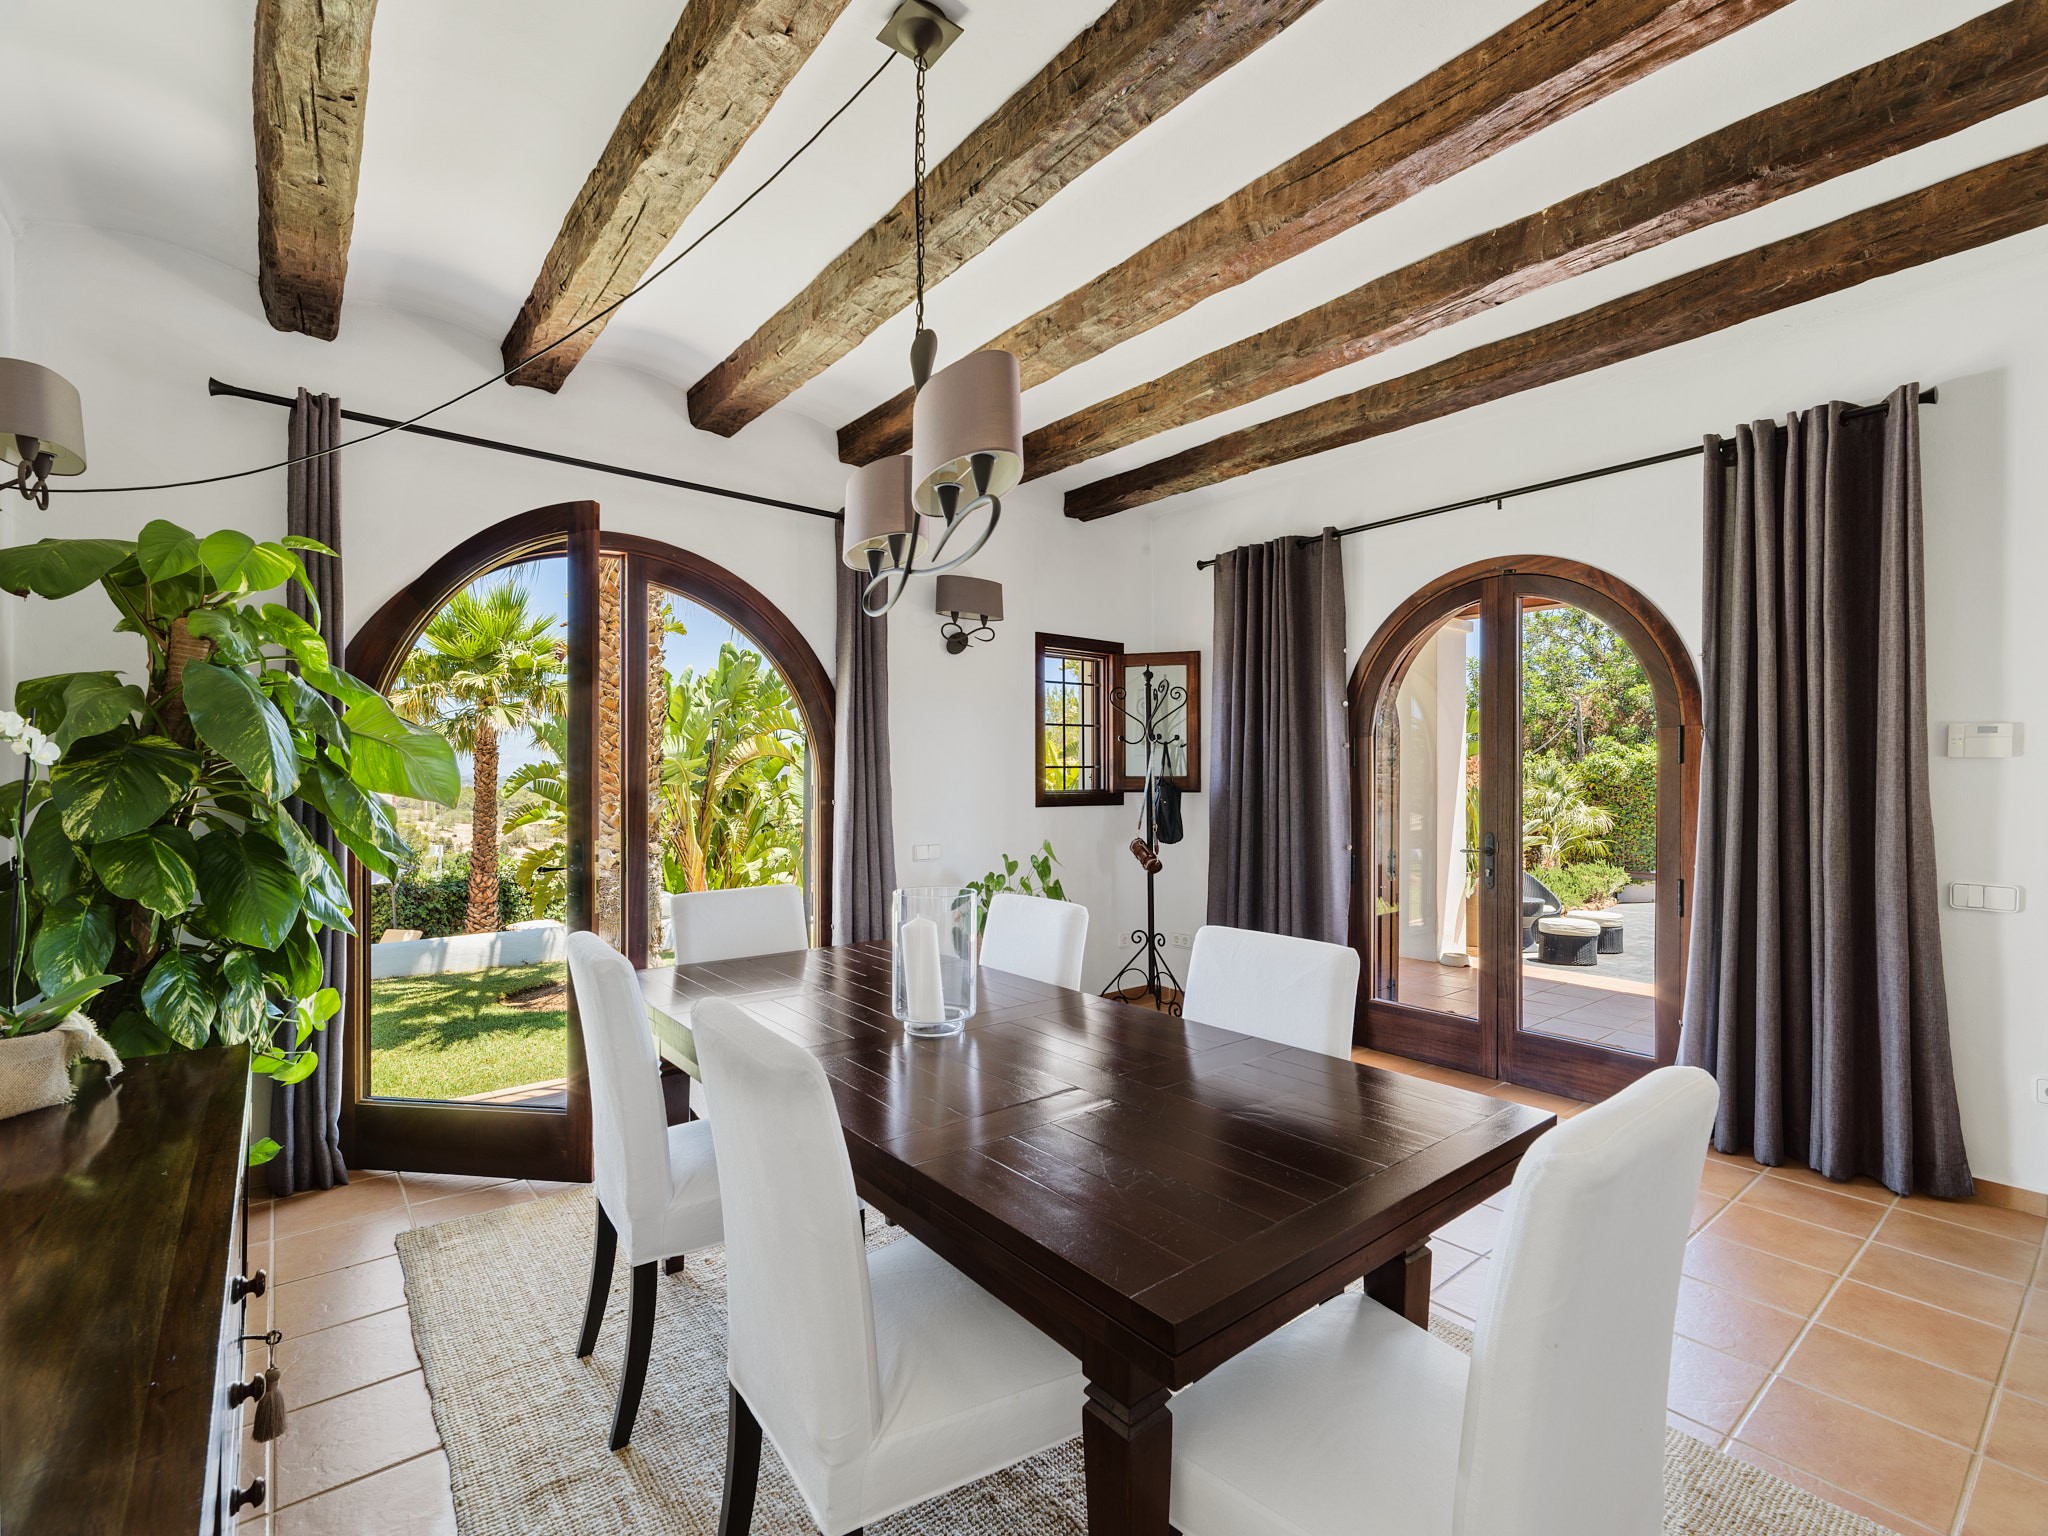 Perfectly maintained finca-style villa in central location - 6